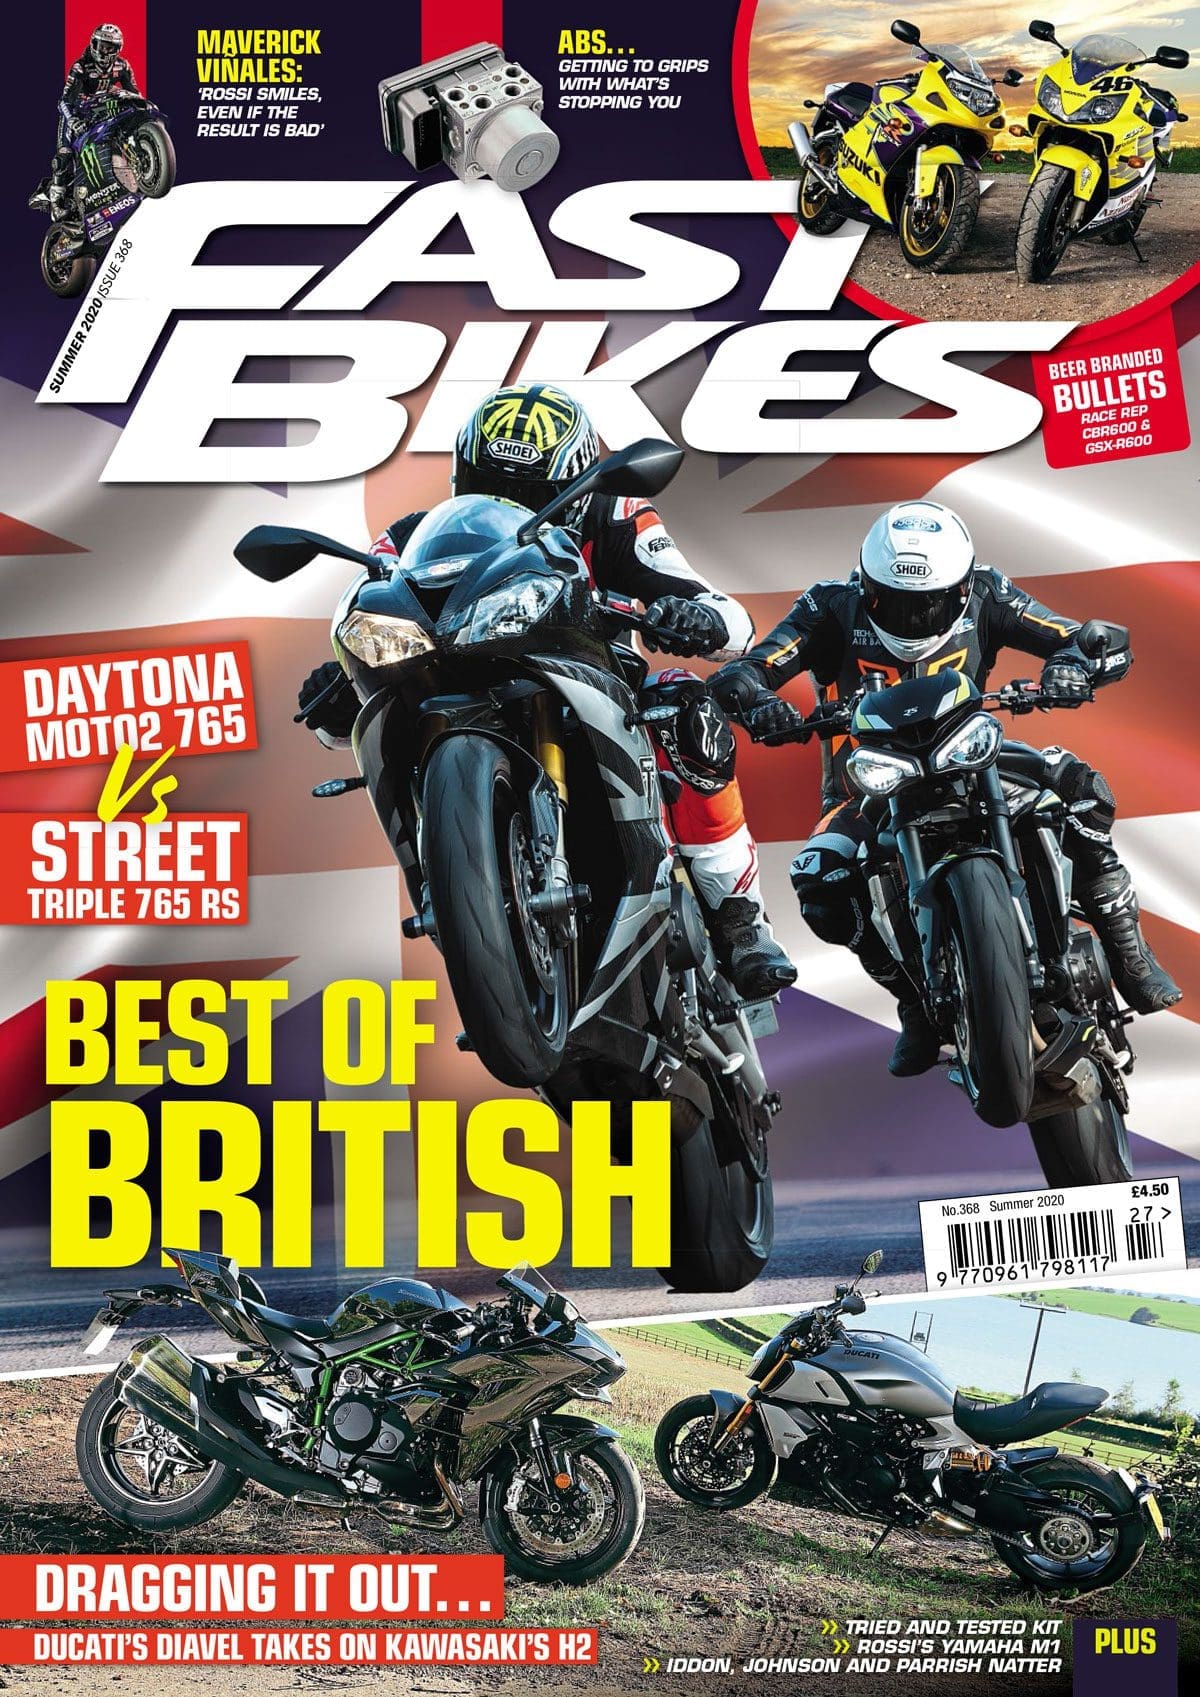 Check out the Summer 2020 edition of Fast Bikes